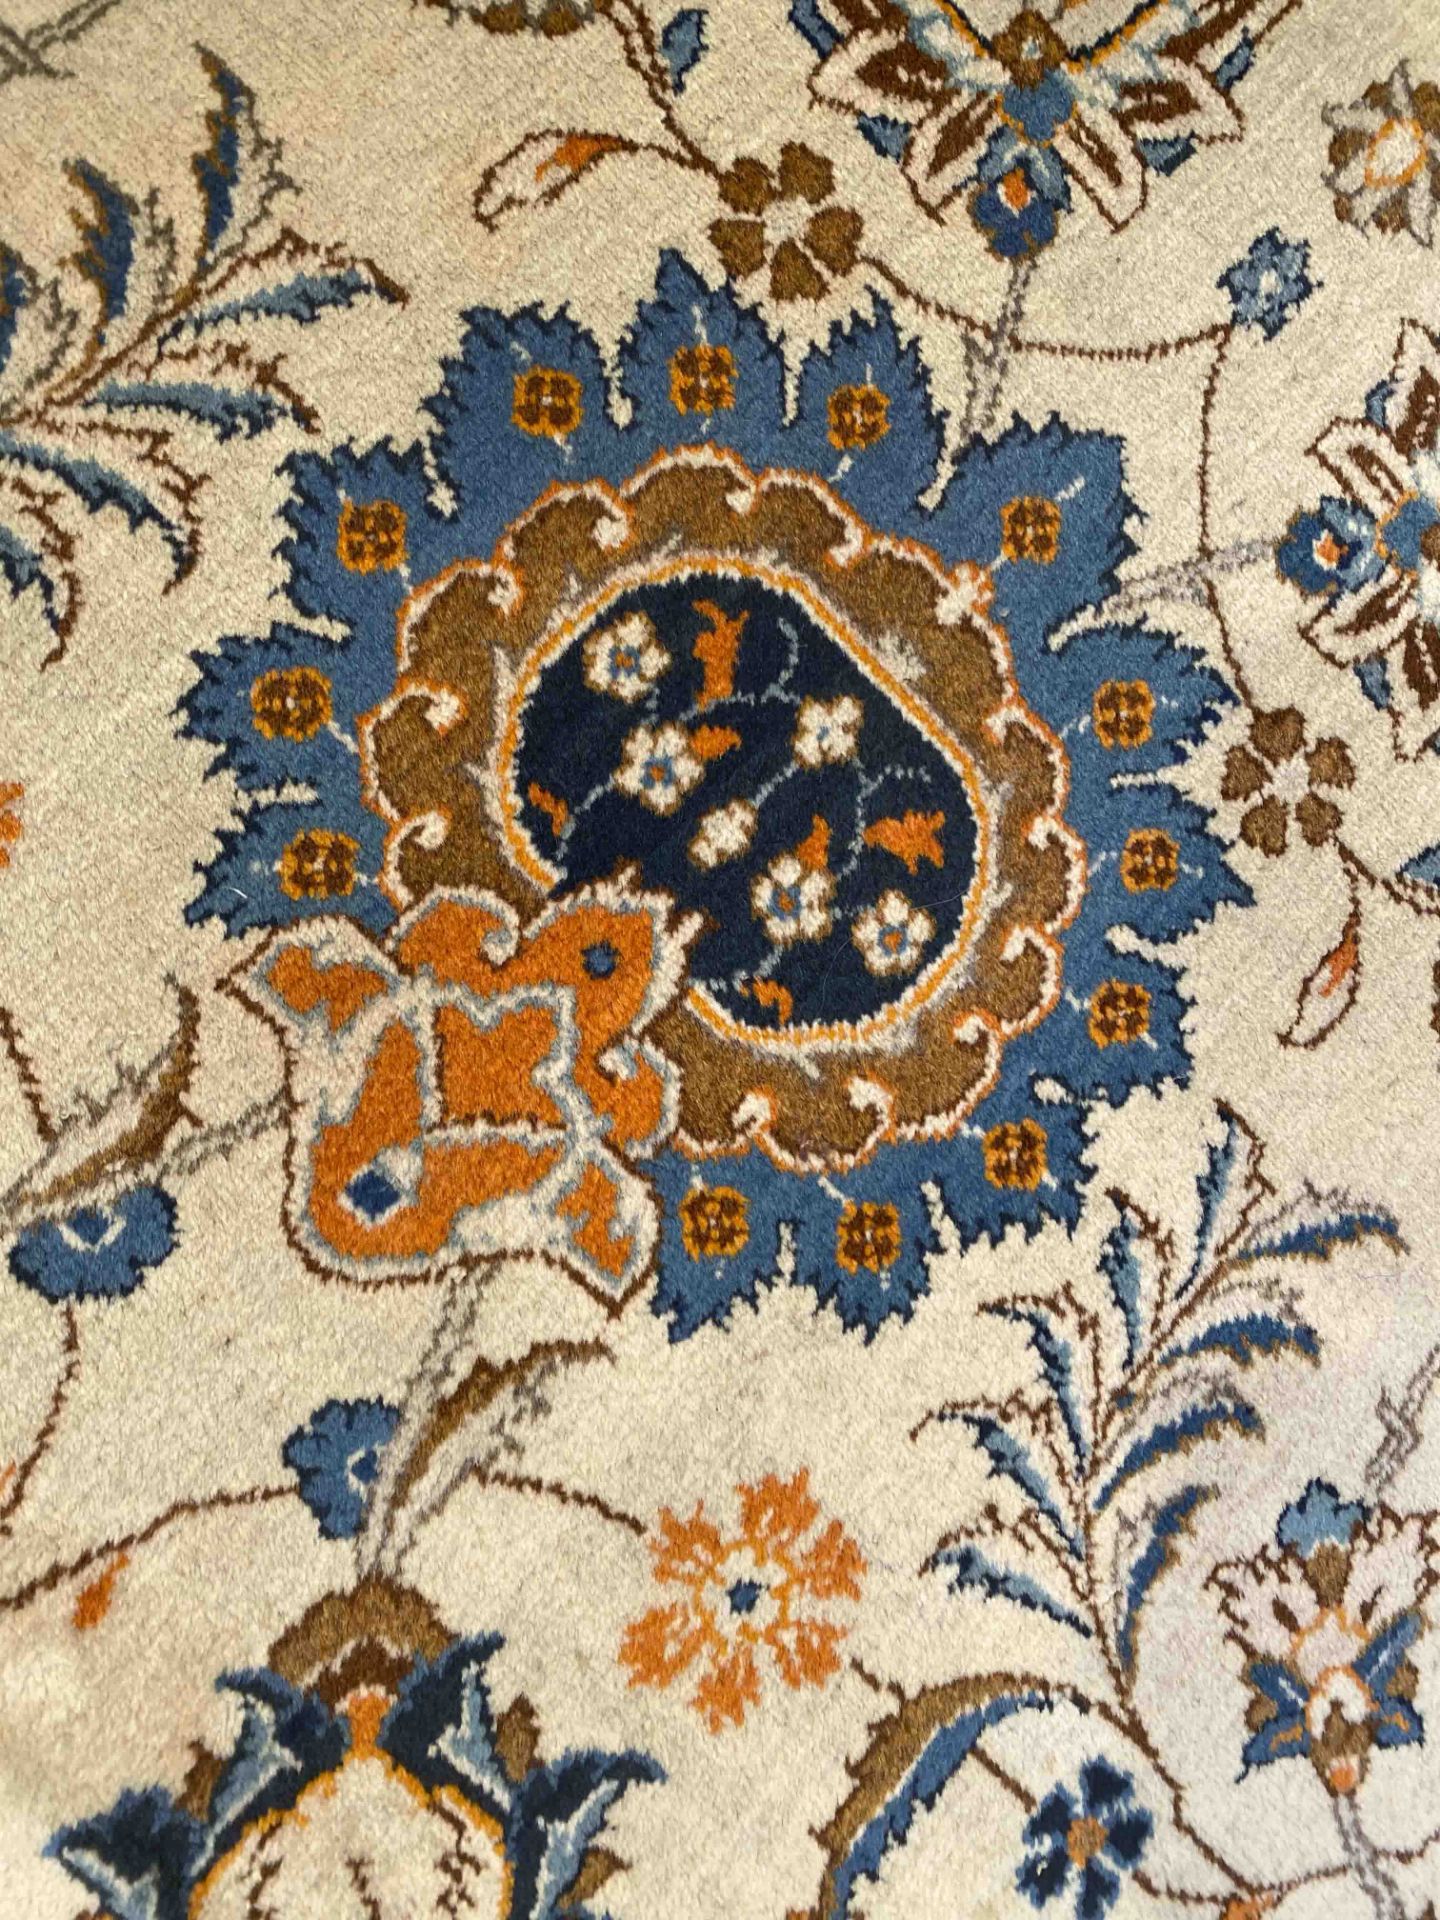 Carpet, Keshan, good condition with minor wear, 422 x 295 cm - The carpet can only be viewed and - Image 2 of 2